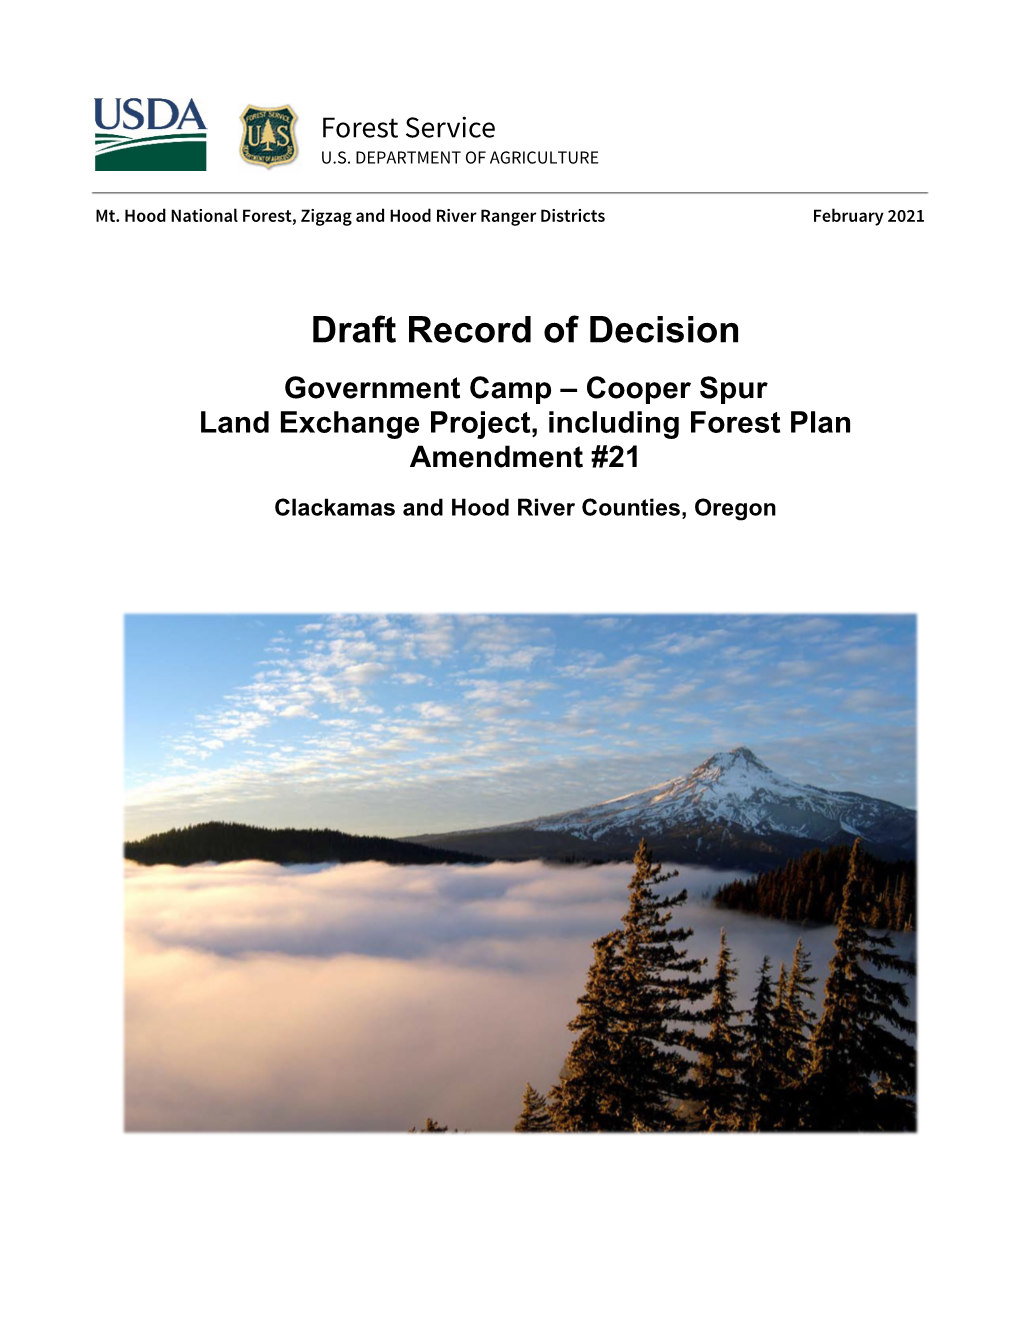 Draft Record of Decision, Government Camp-Cooper Spur Land